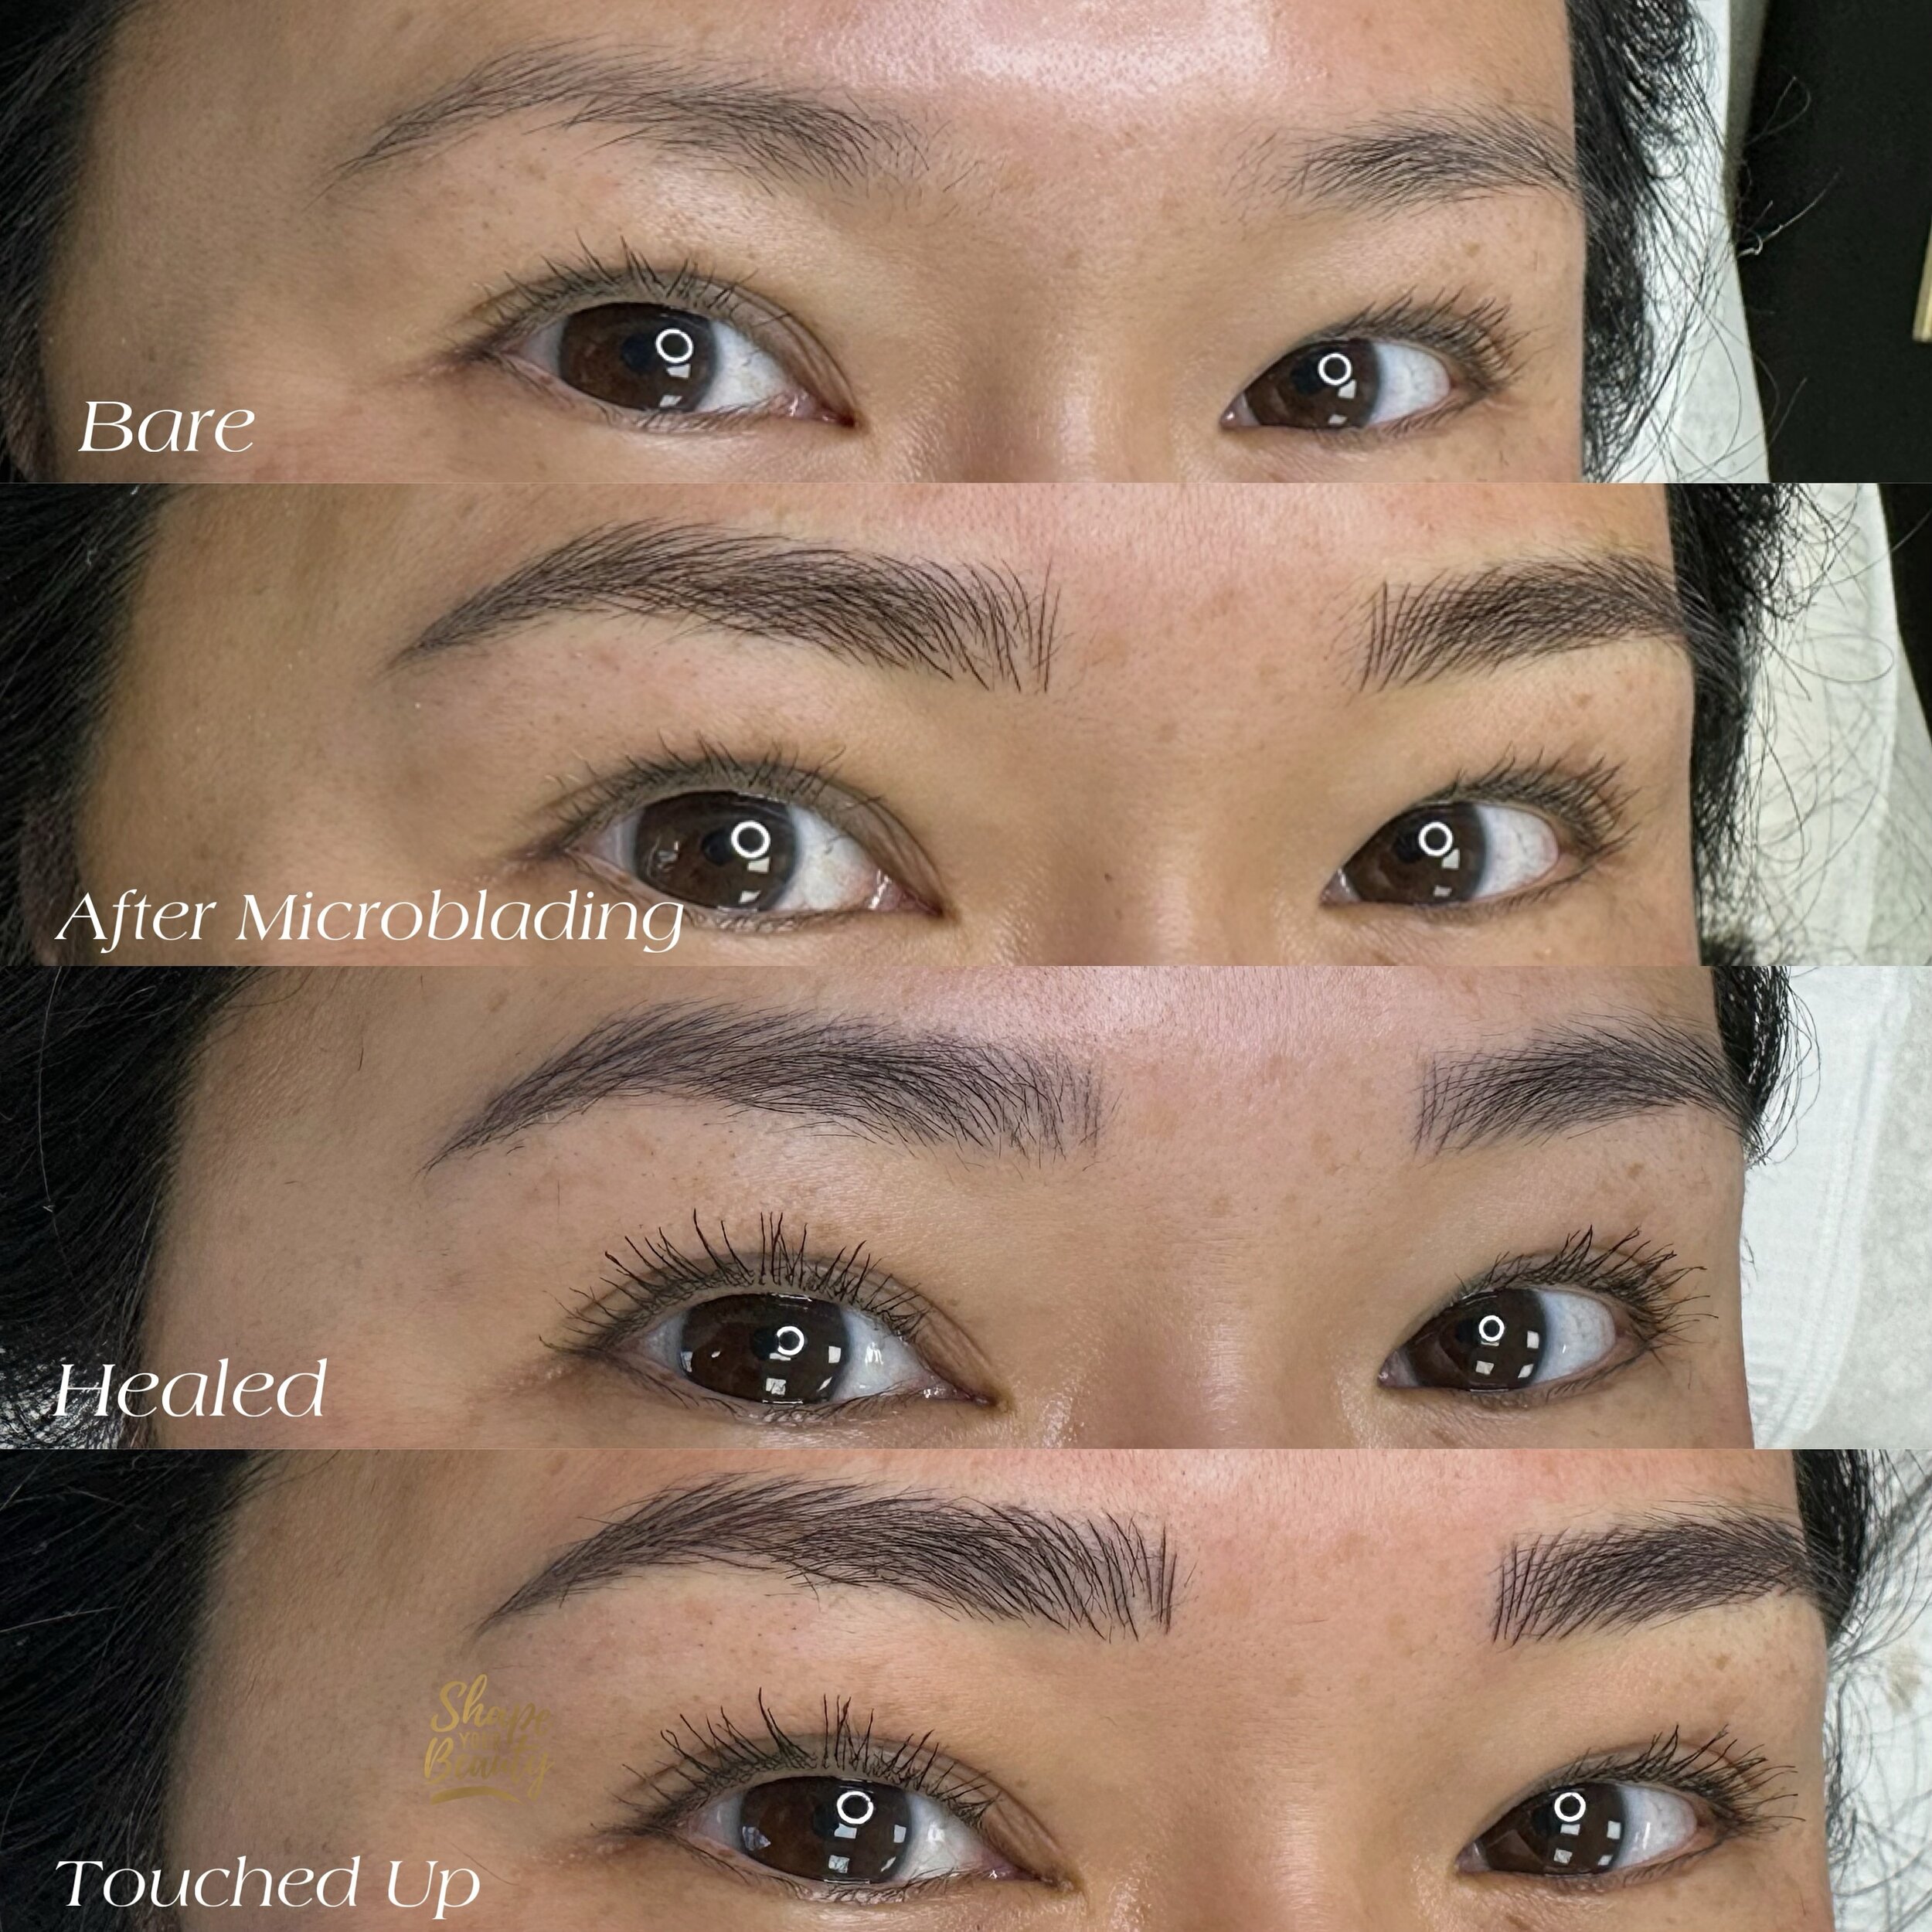 ✨ Witness the transformation from bare brows to bold beauty! 👀 Look at this brow journey: from bare brows, to the initial microblading, to the healed results, and finally, after the touch-up perfection. 💫 Achieve flawless brows that frame your face